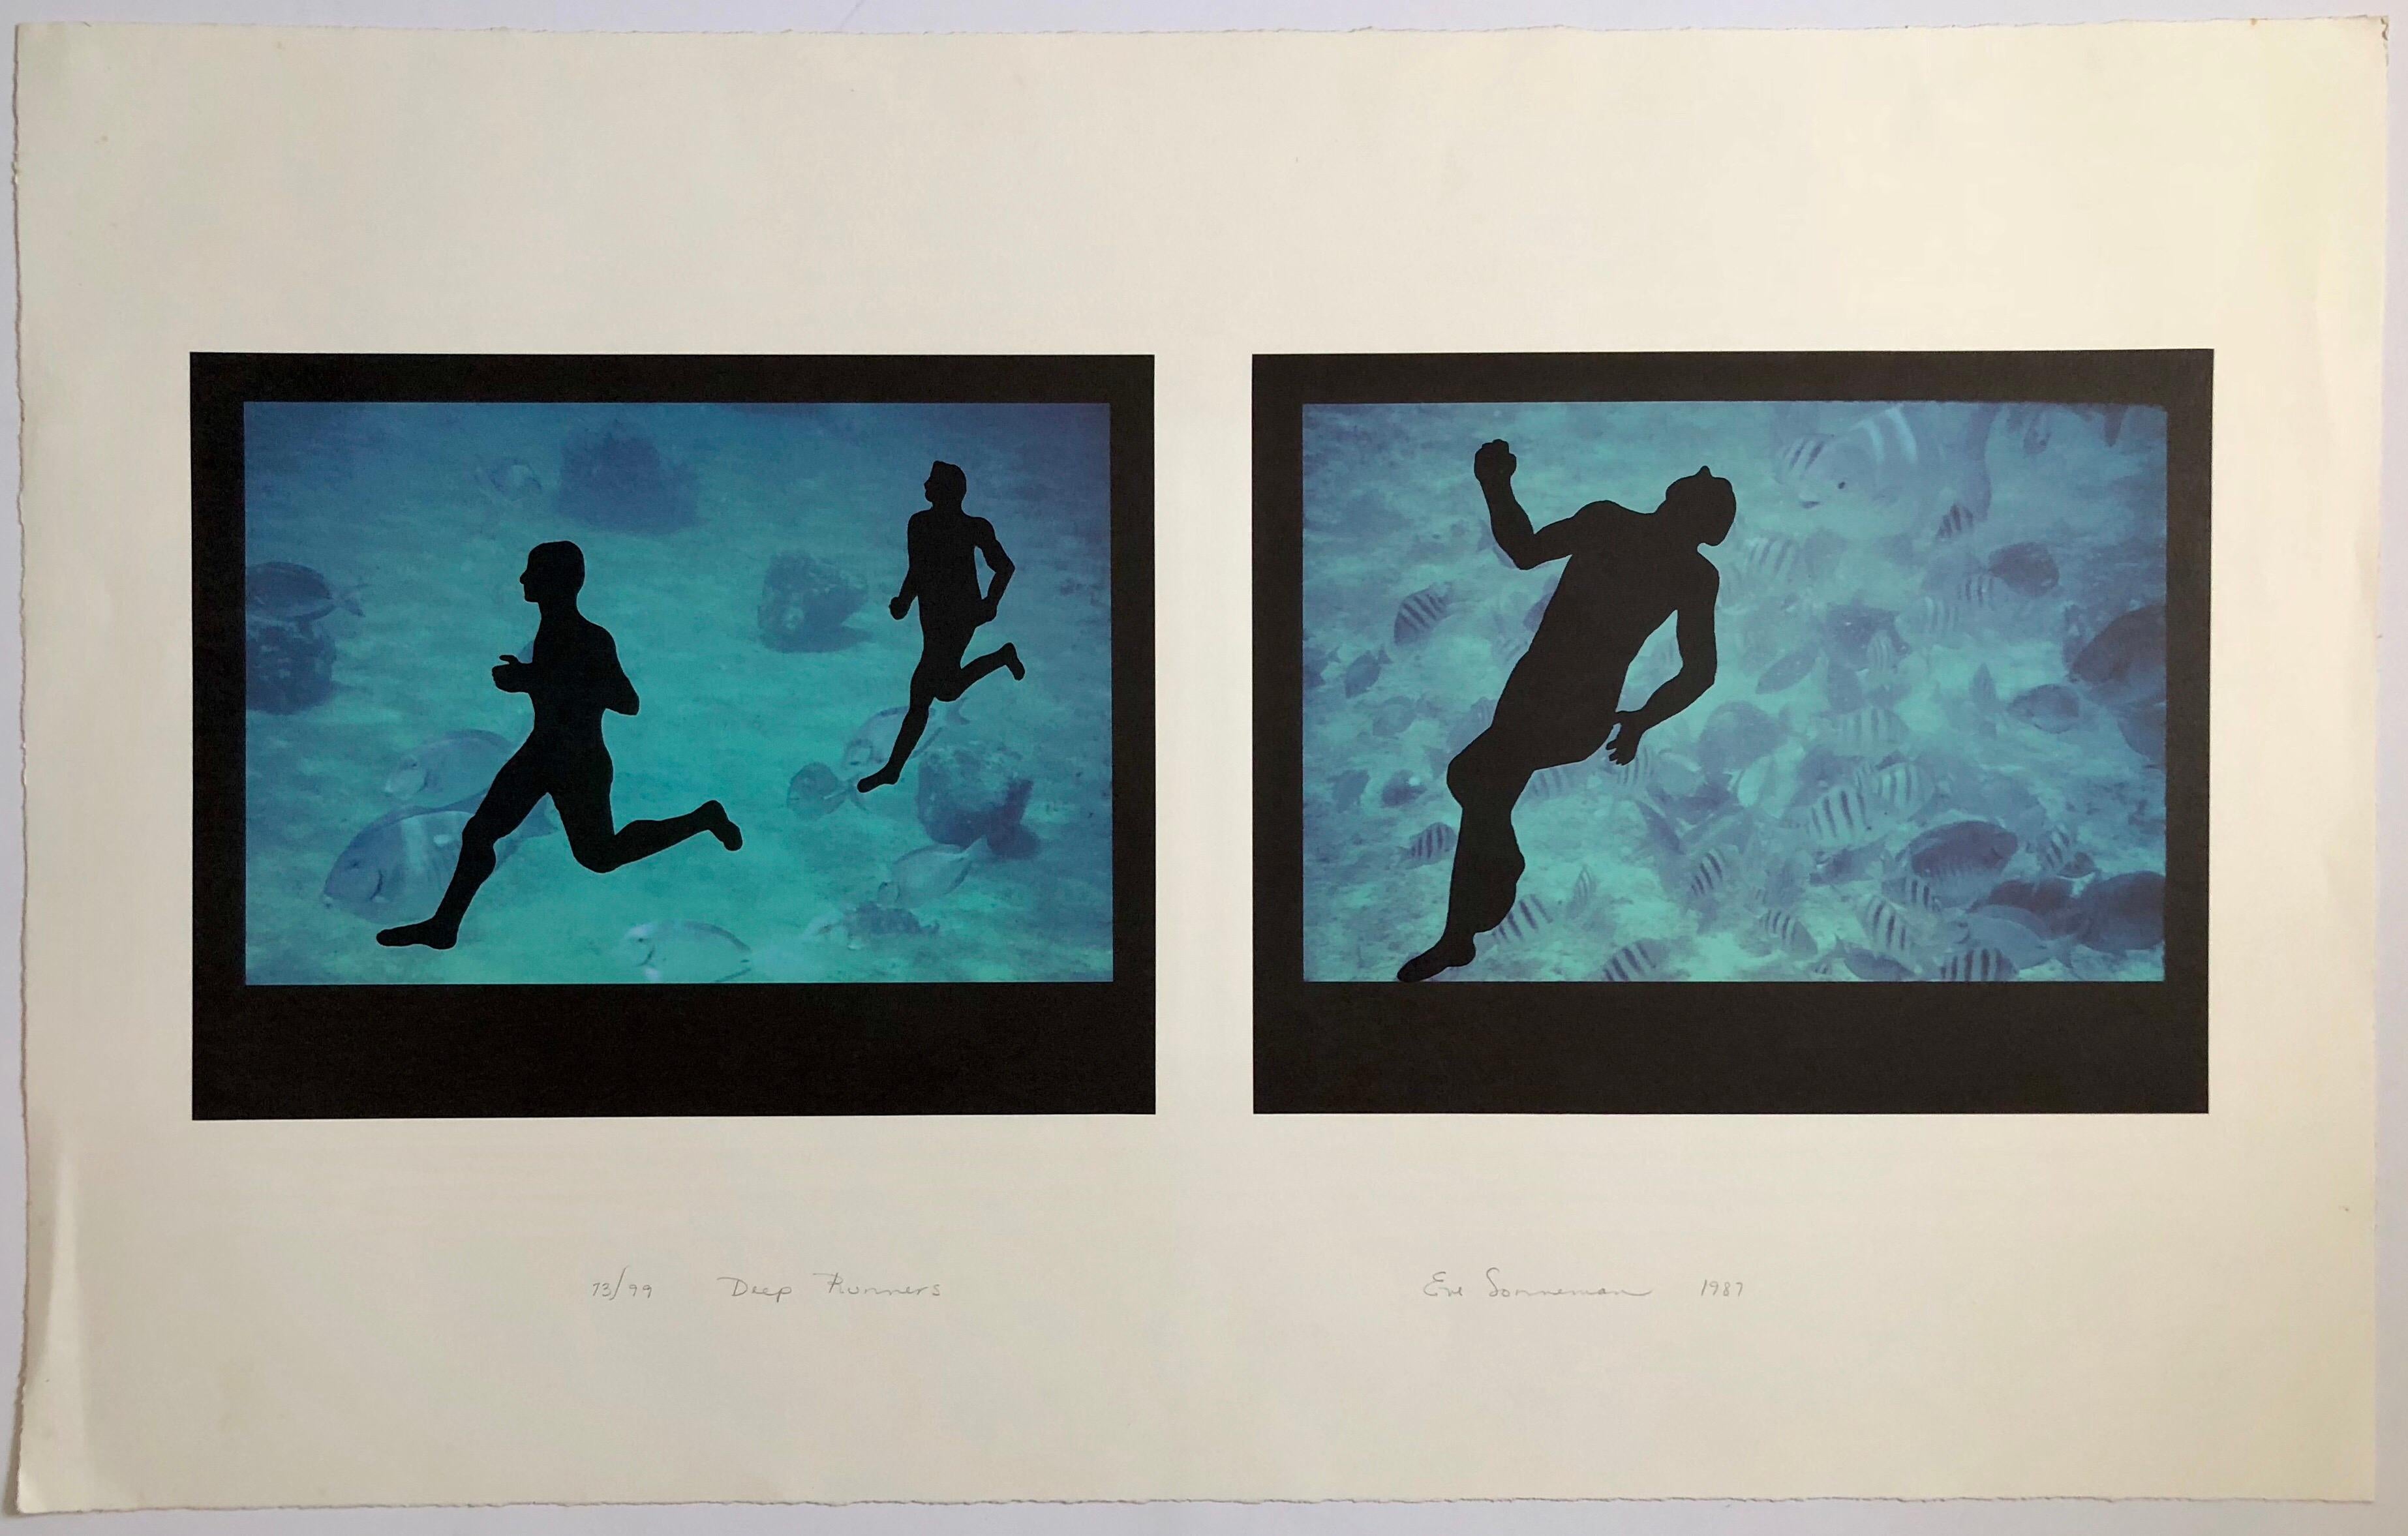 Deep Runners, Hand signed, dated,and numbered from limited edition. 
This is from a show at Sidney Janis Gallery and is from the estate of Joan Sonnabend.
Eve Sonneman (born in Chicago on 1946) is an American photographer and artist. She did a